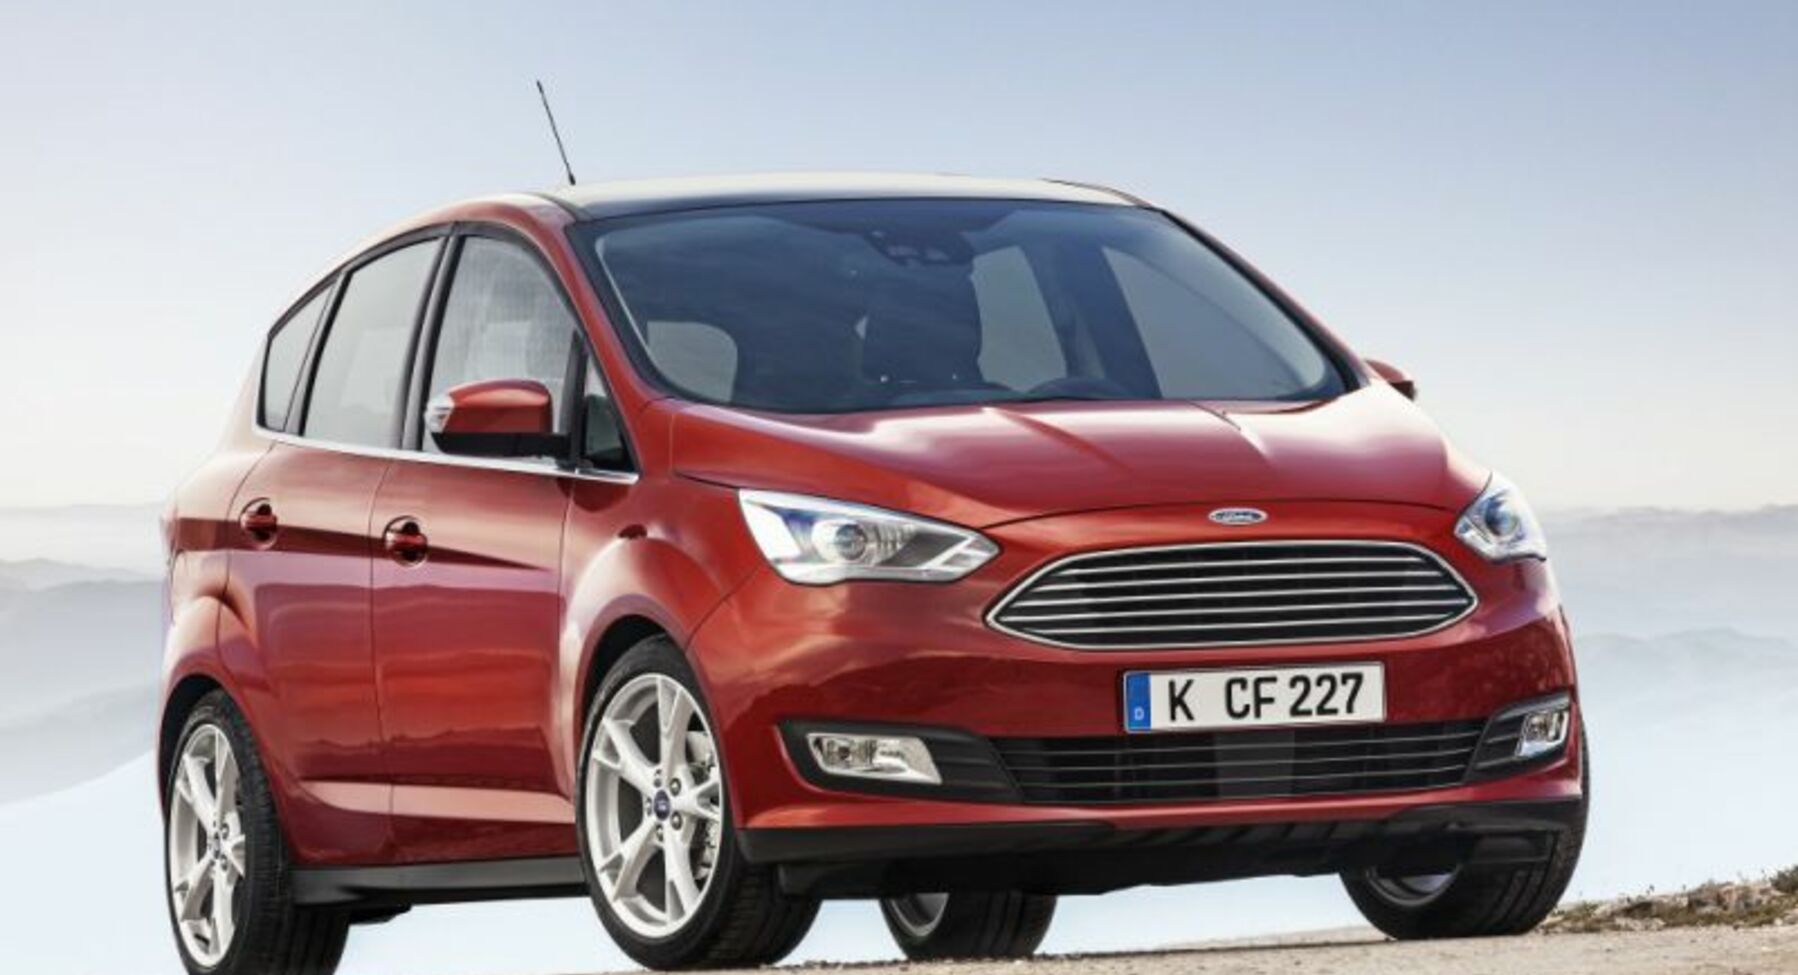 Ford C-MAX II (facelift 2015) 1.5 EcoBoost (150 Hp) S&S 2015, 2016, 2017, 2018, 2019, 2020, 2021 